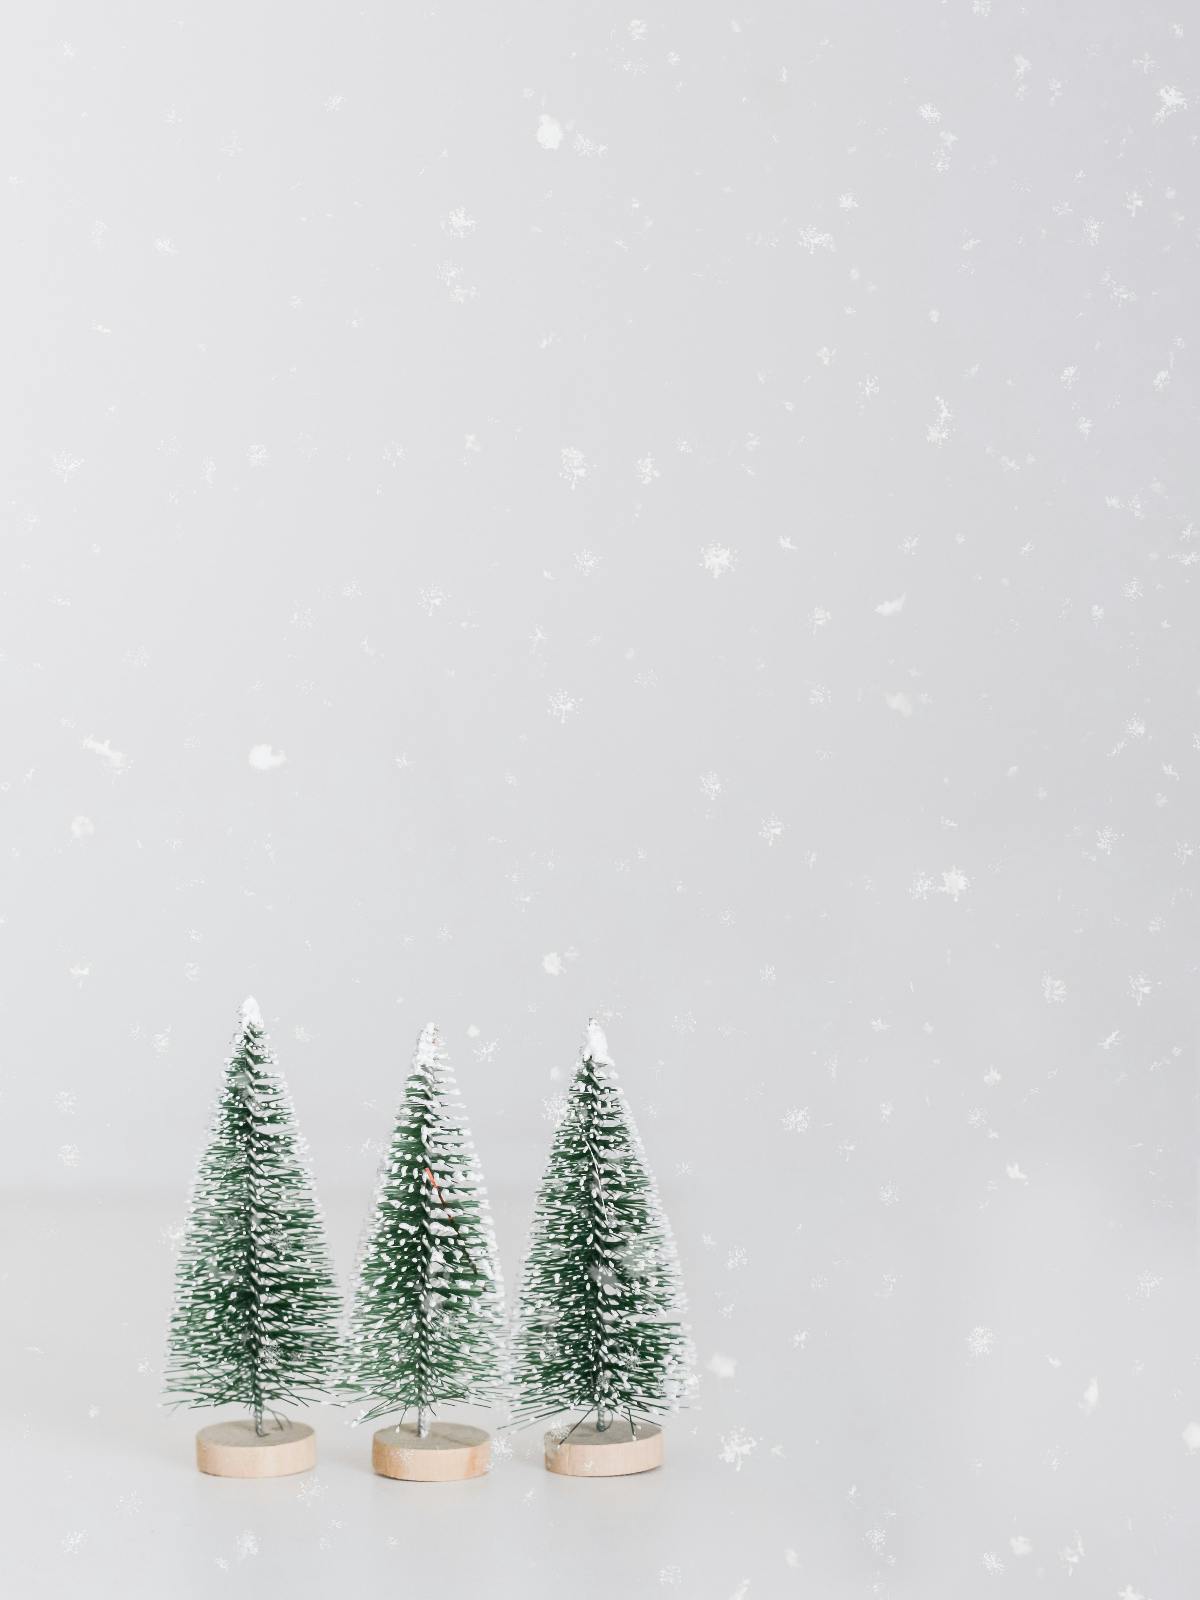 3 small trees dusted with snow standing against  a light blue background.